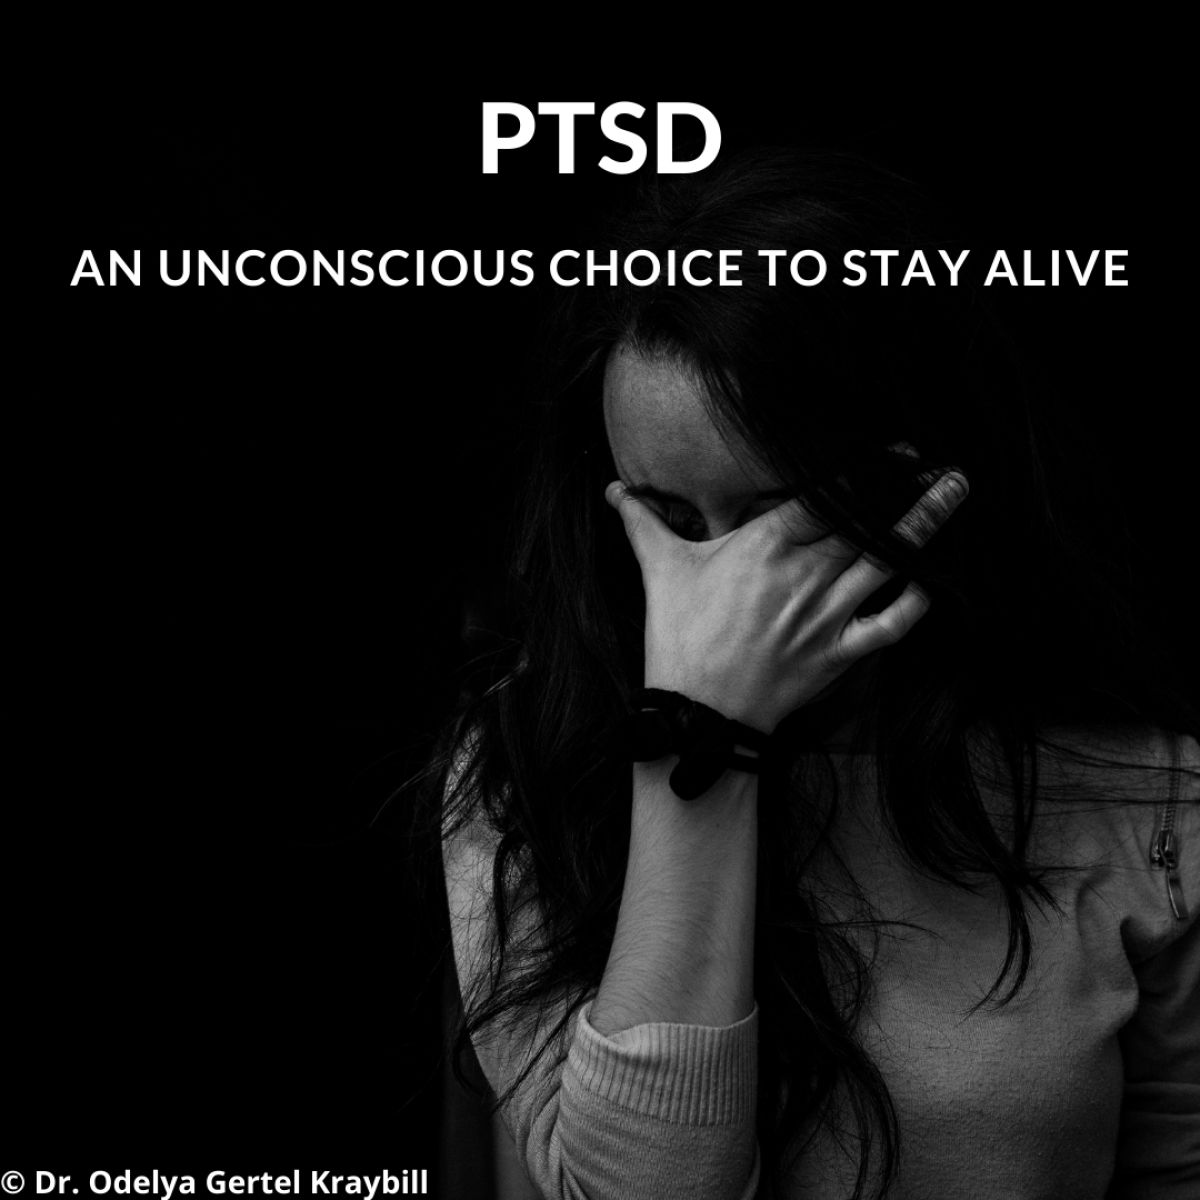 PTSD: An Unconscious Choice to Stay Alive